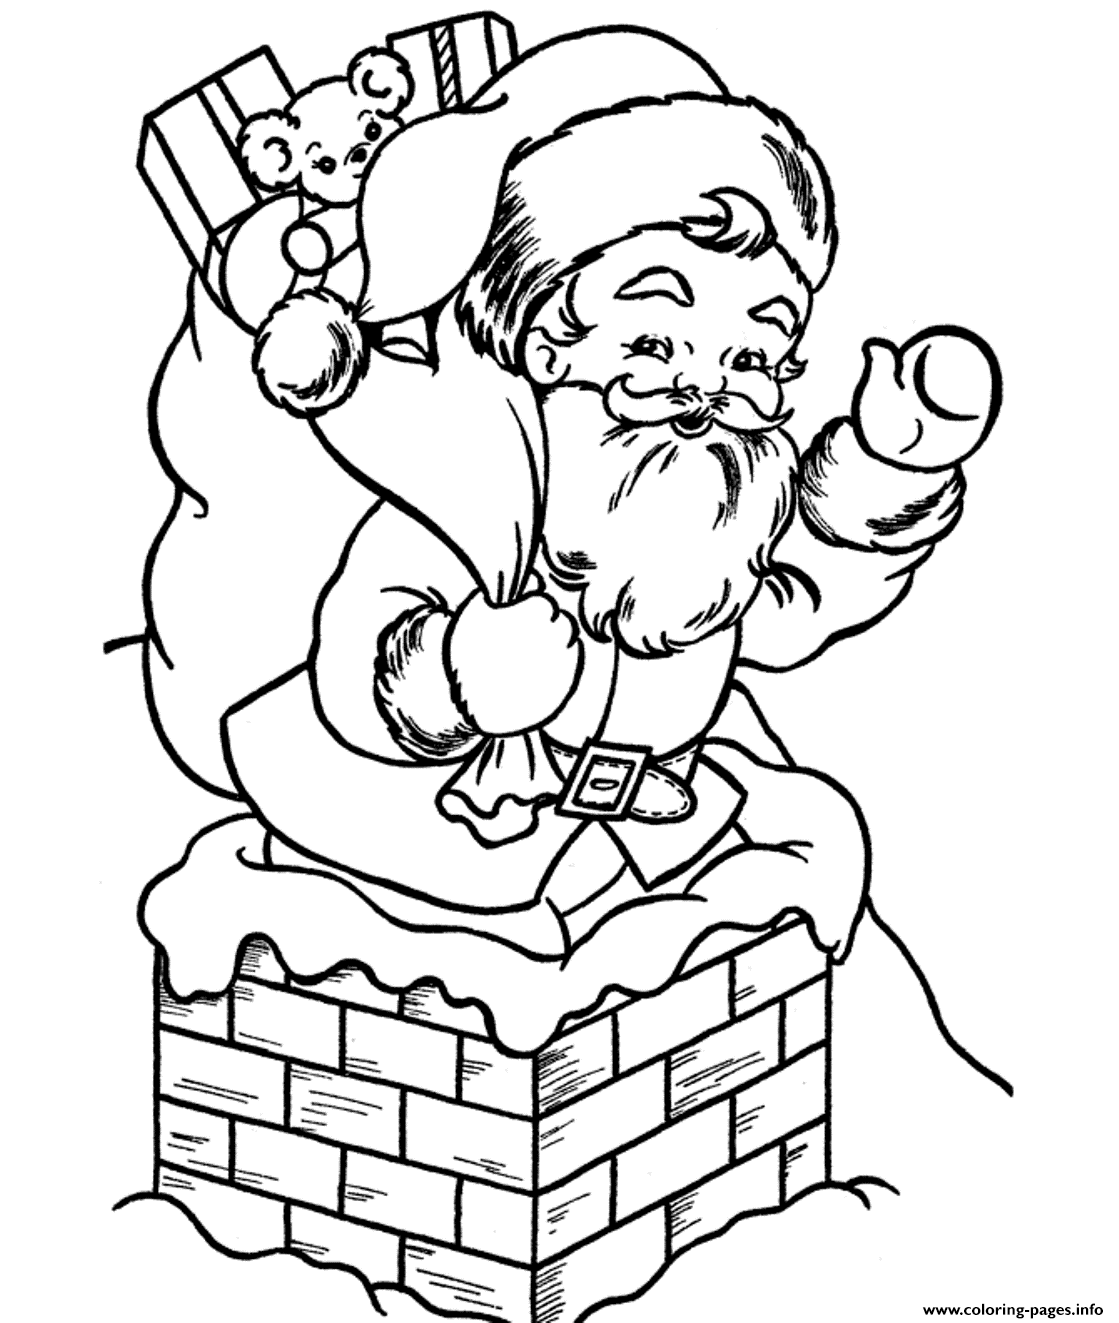 Santa Into A Pit In Christmas S Printable4021 coloring